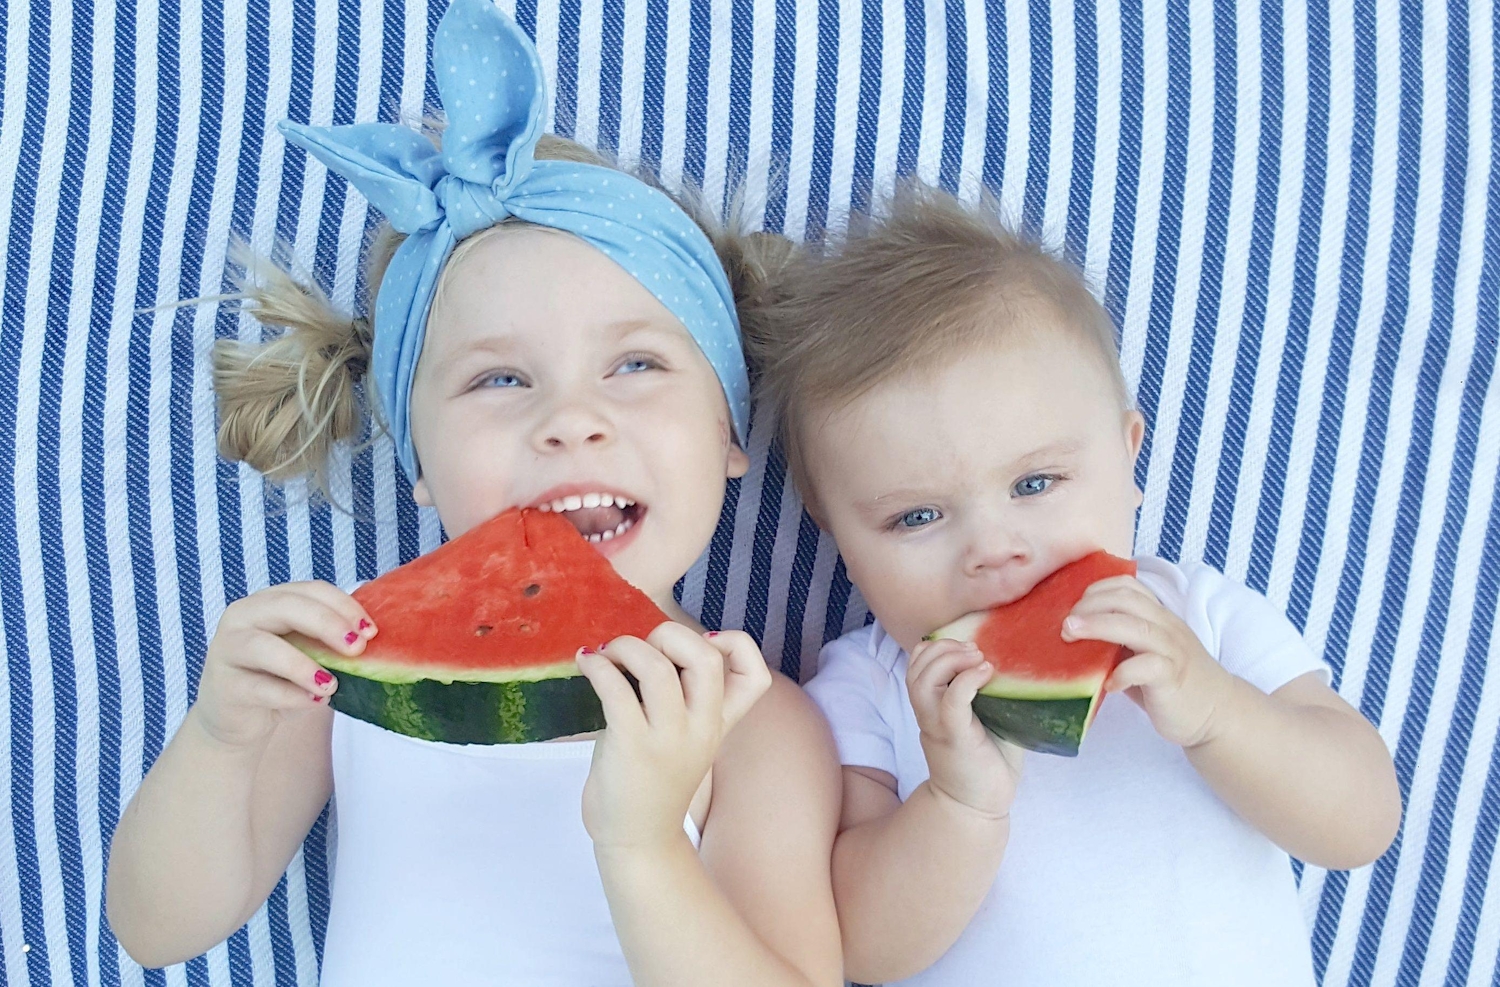 Two young children eating watermelon on a striped blanket